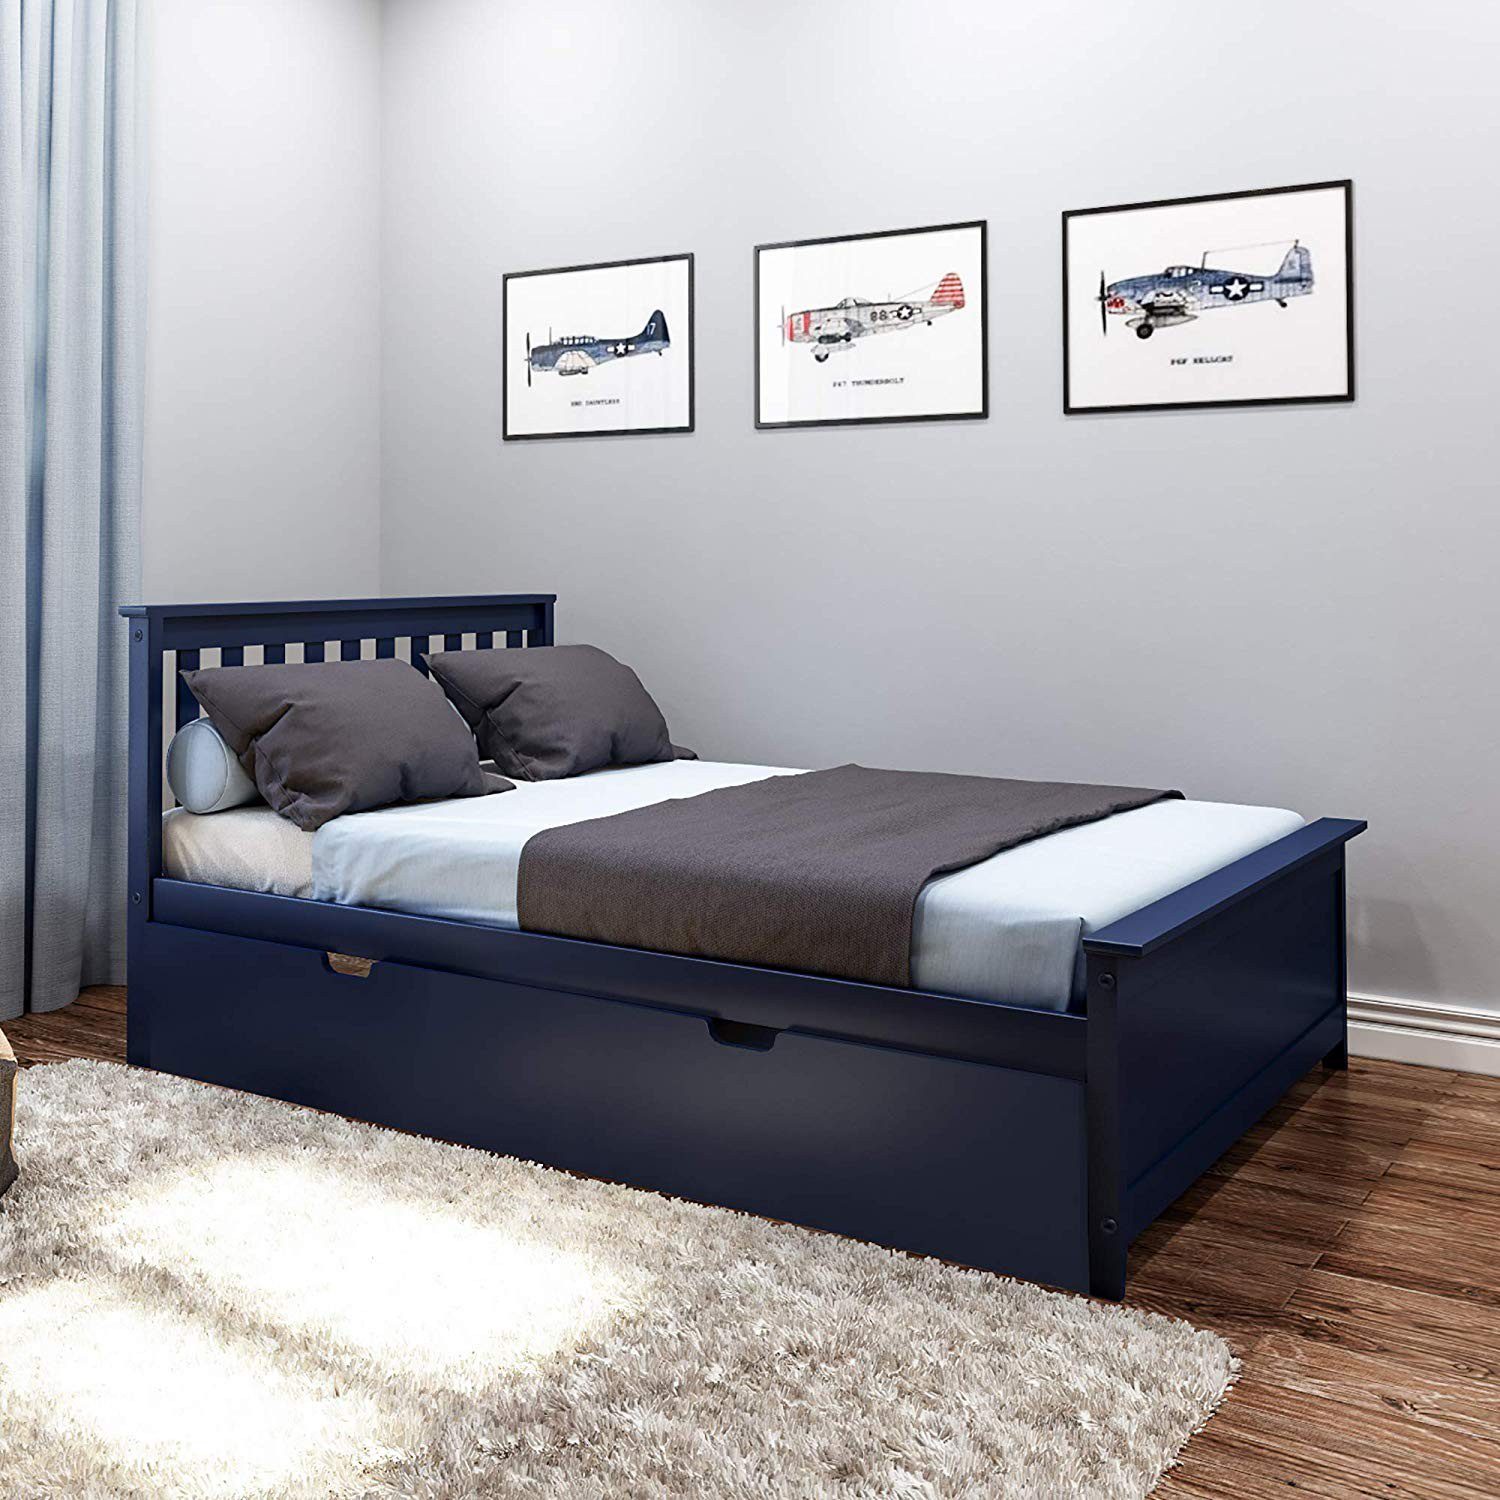 SOLID WOOD FULL SIZE PLATFORM BED IN BLUE FINISH WITH TRUNDLE BED